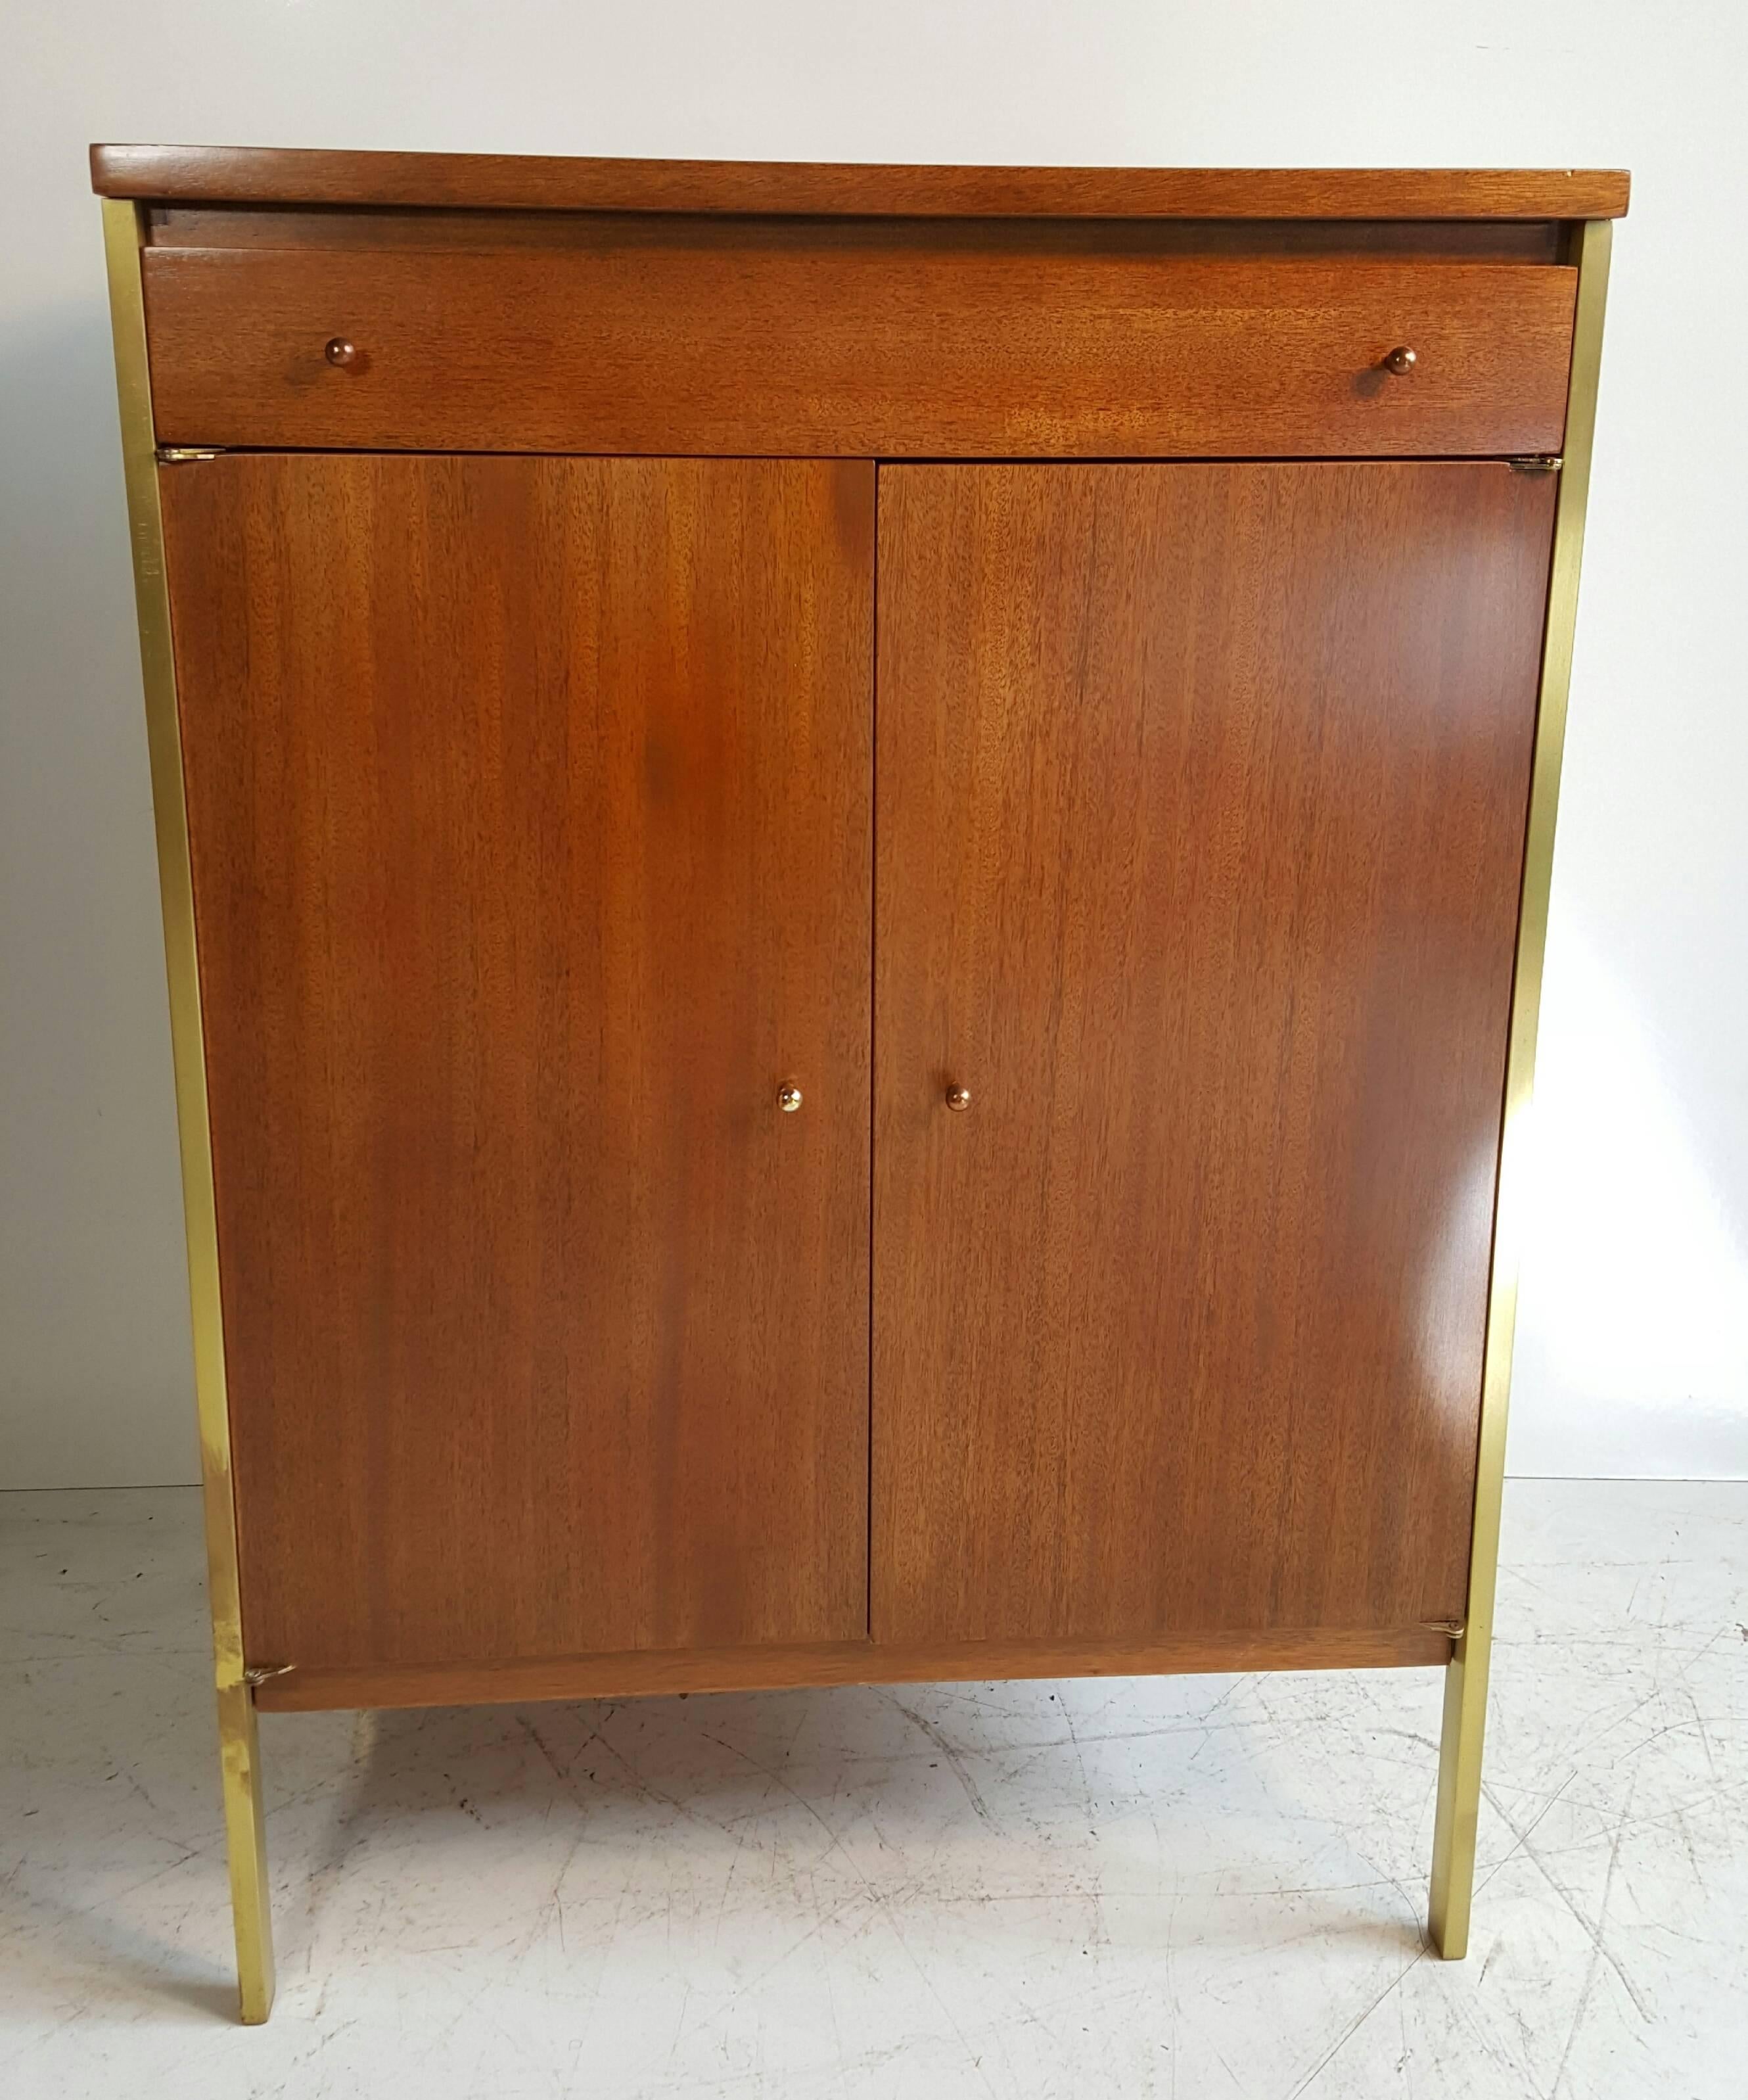 This small server or bar cabinet by Paul McCobb is walnut-stained mahogany with brass frame and pulls. One-drawer, two-doors inside, an adjustable shelf. Great scale and proportion. Retains original Paul McCobb connoisseur label.